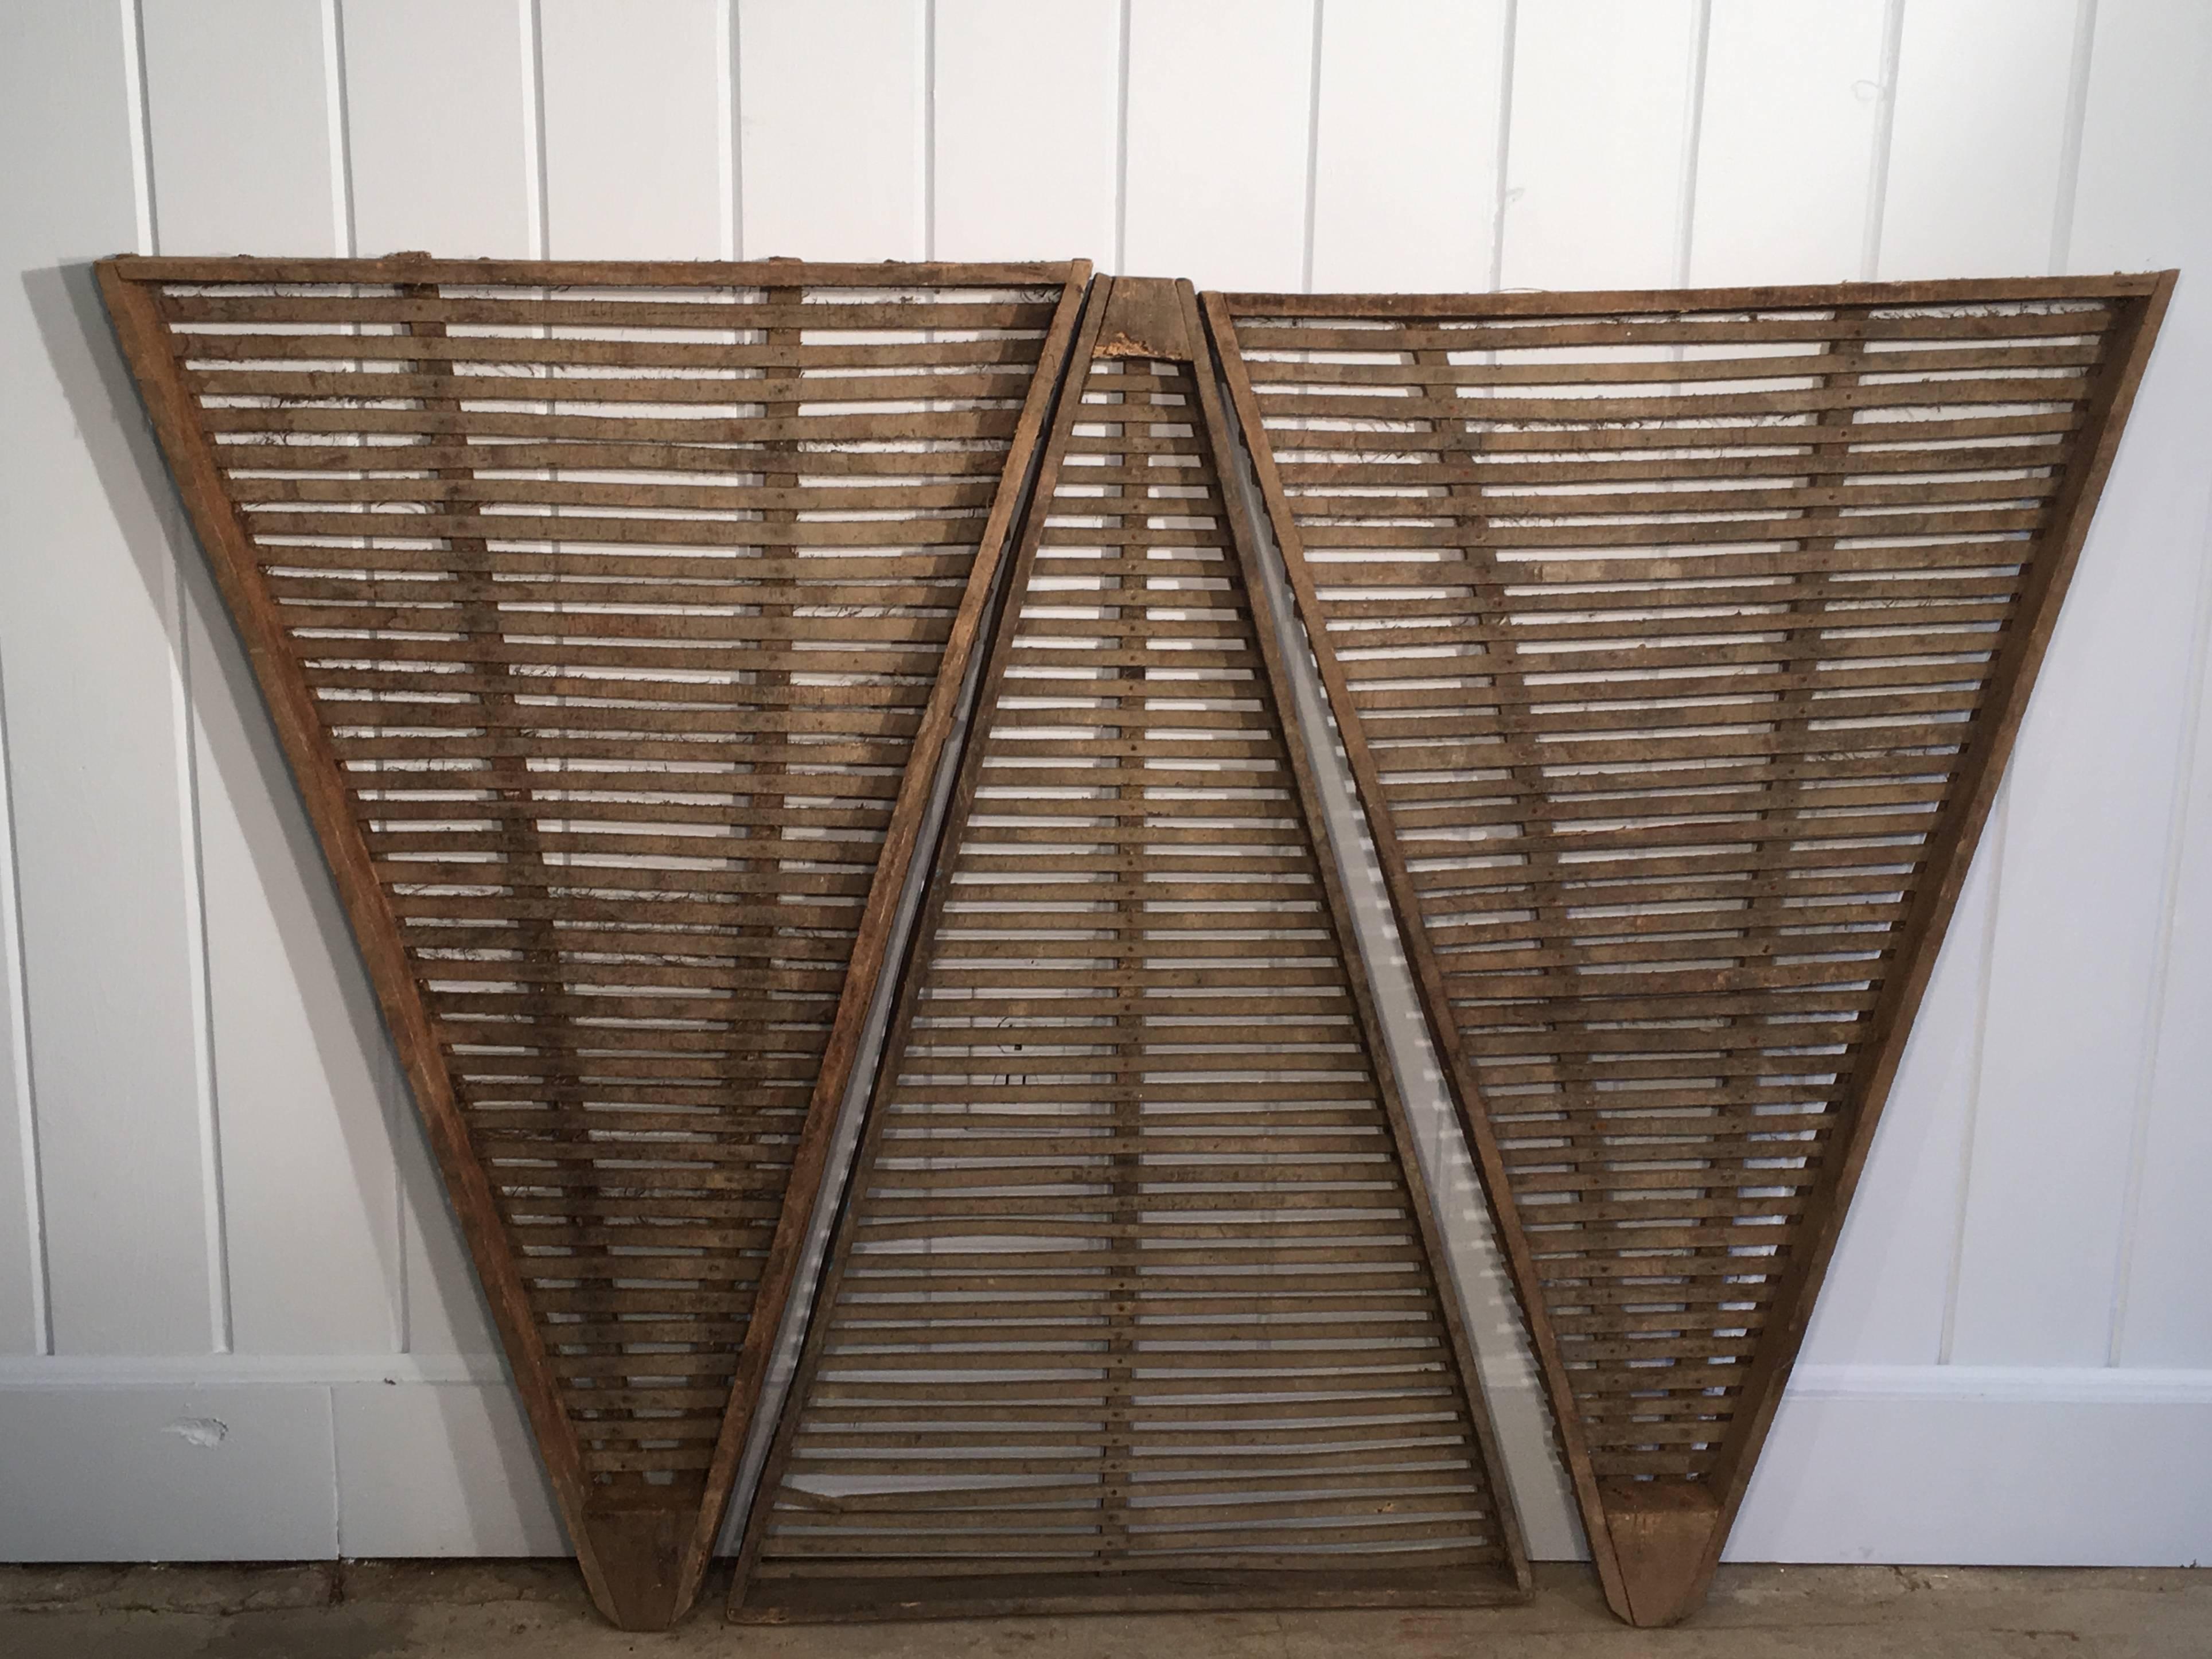 Hand-Crafted French Handmade Triangular Wooden Clés des Prunes 'Prune Drying Racks'